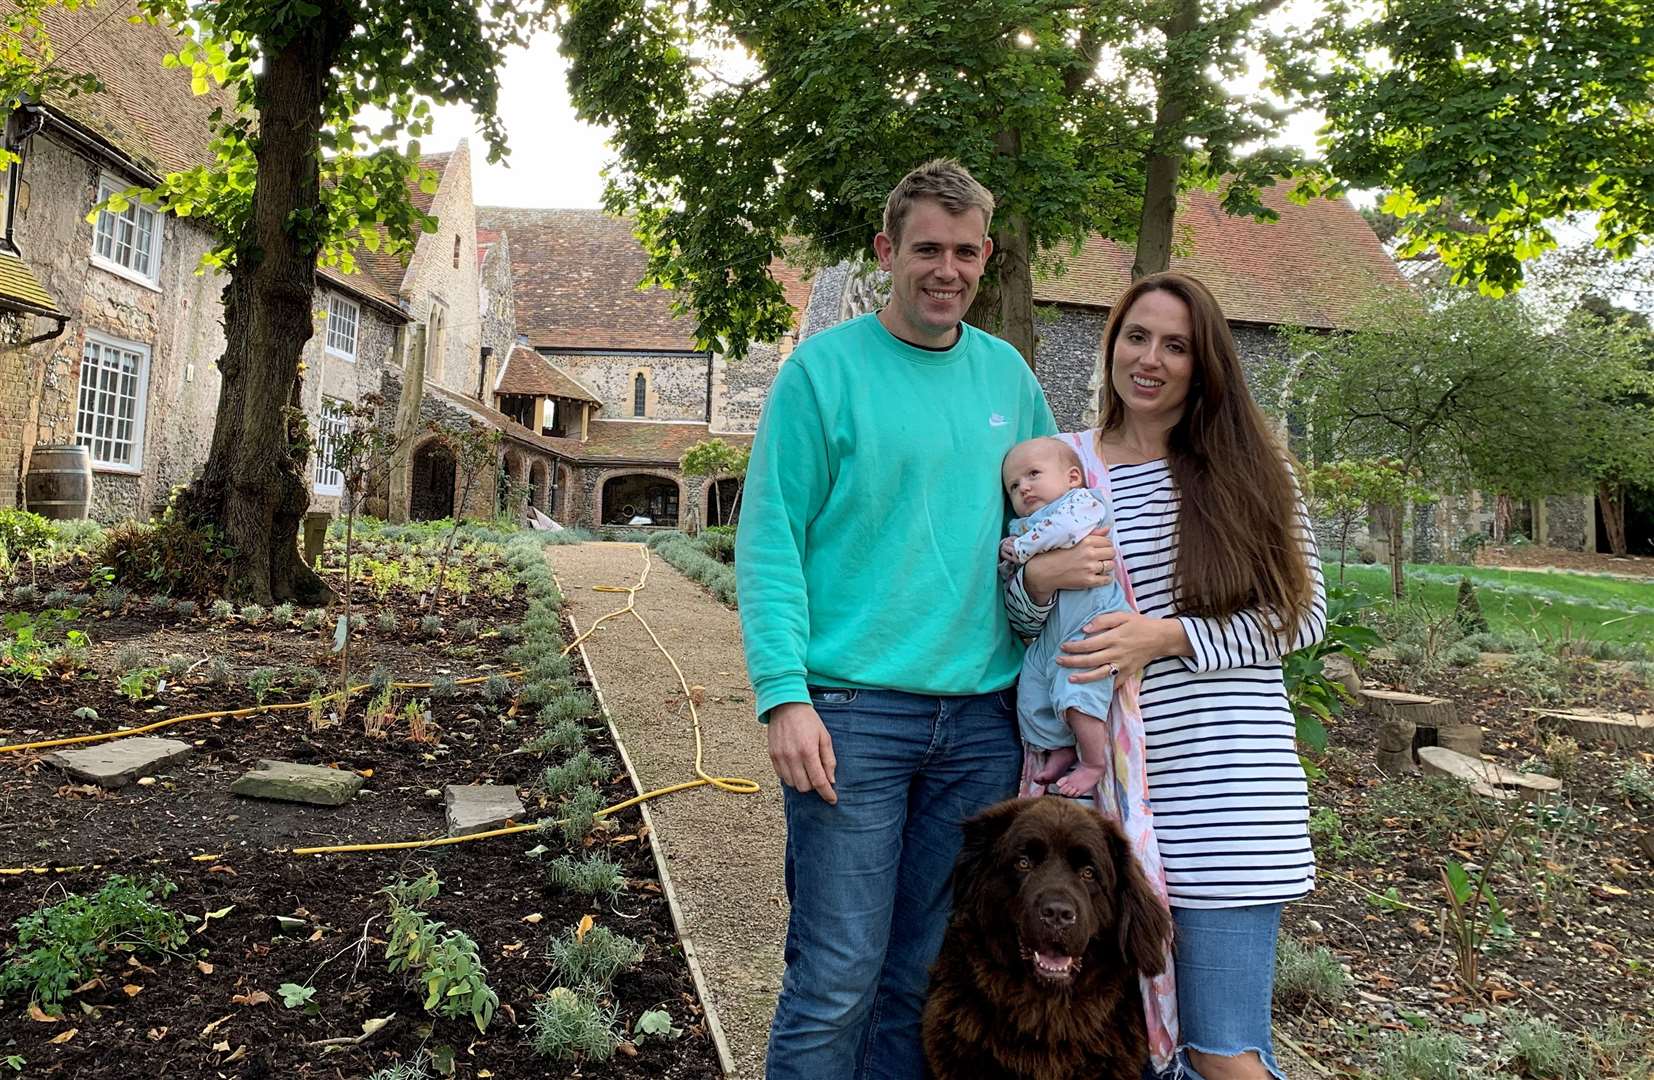 Owners of Salmestone Grange in Margate Jenny and Henry Pelly, pictured with their youngest daughter and their dog Moose